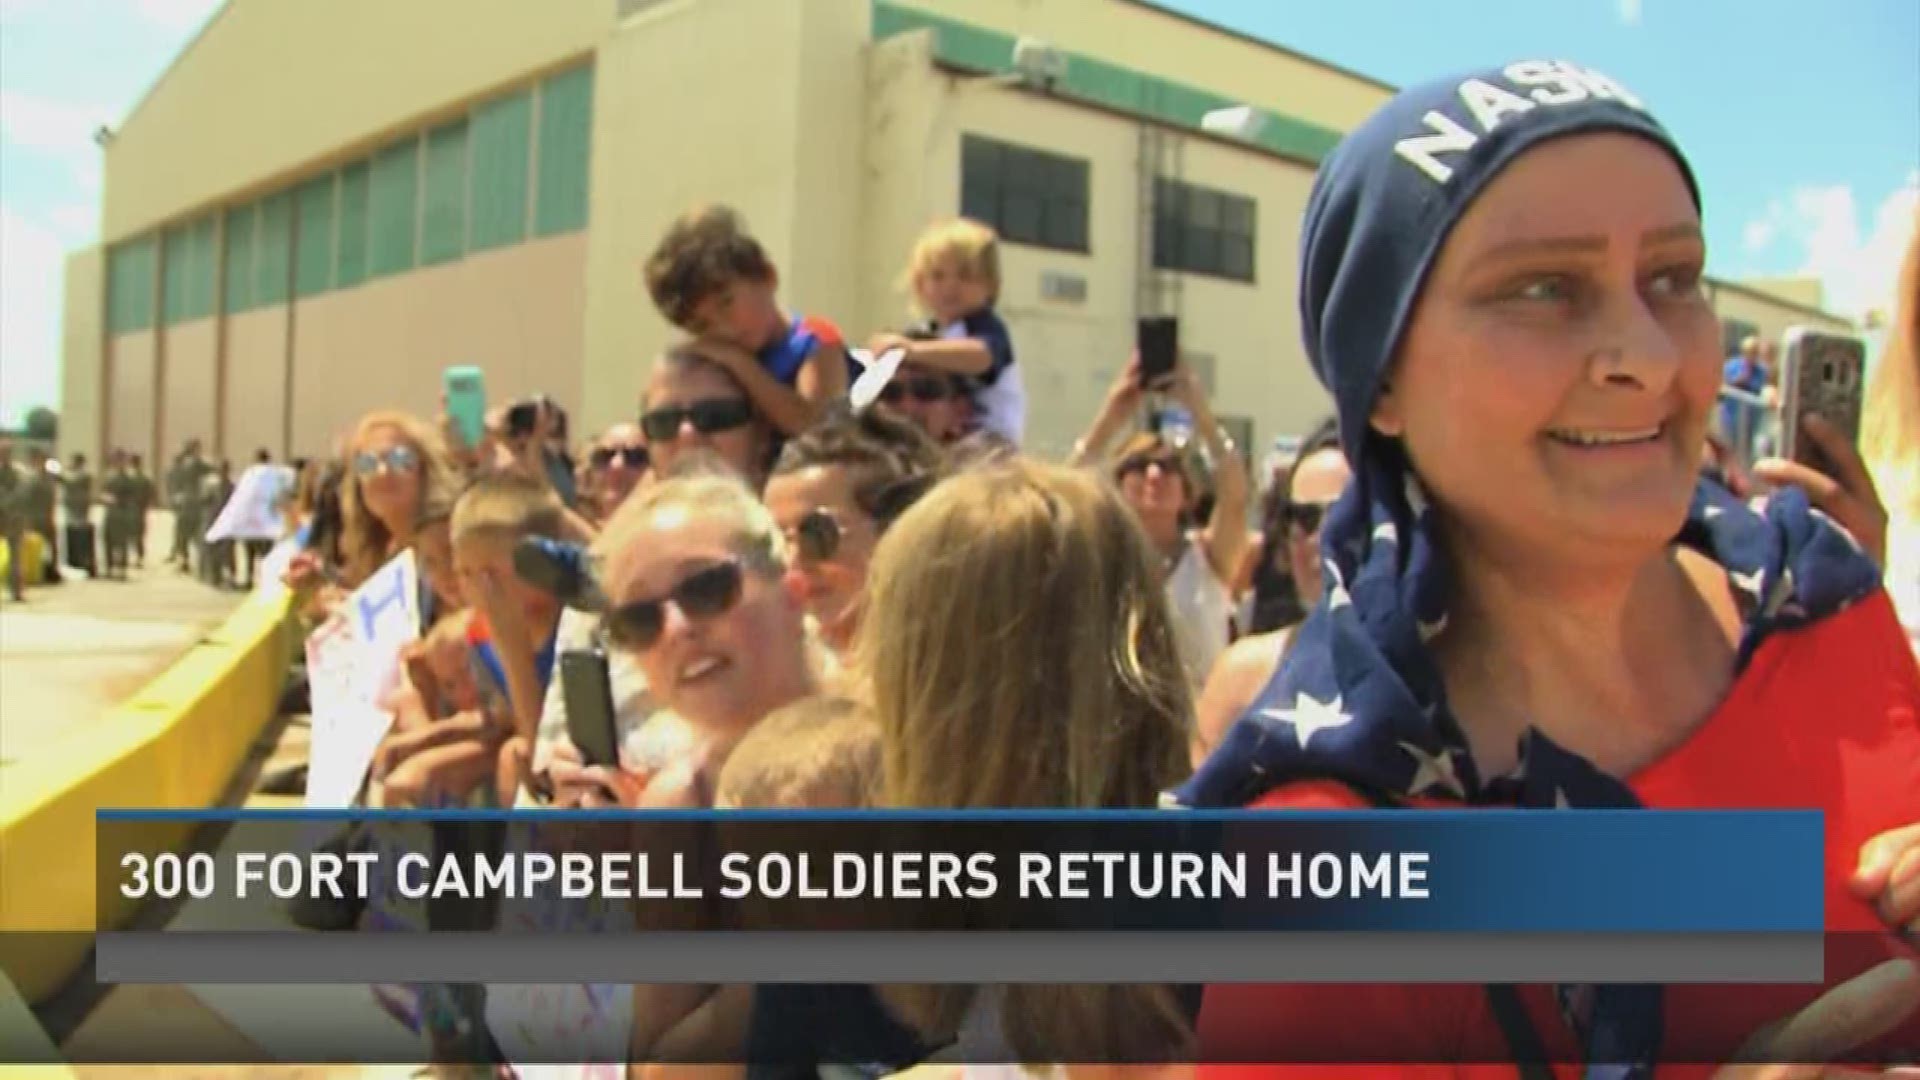 For more than 300 soldiers, it sure felt good to be home Thursday.